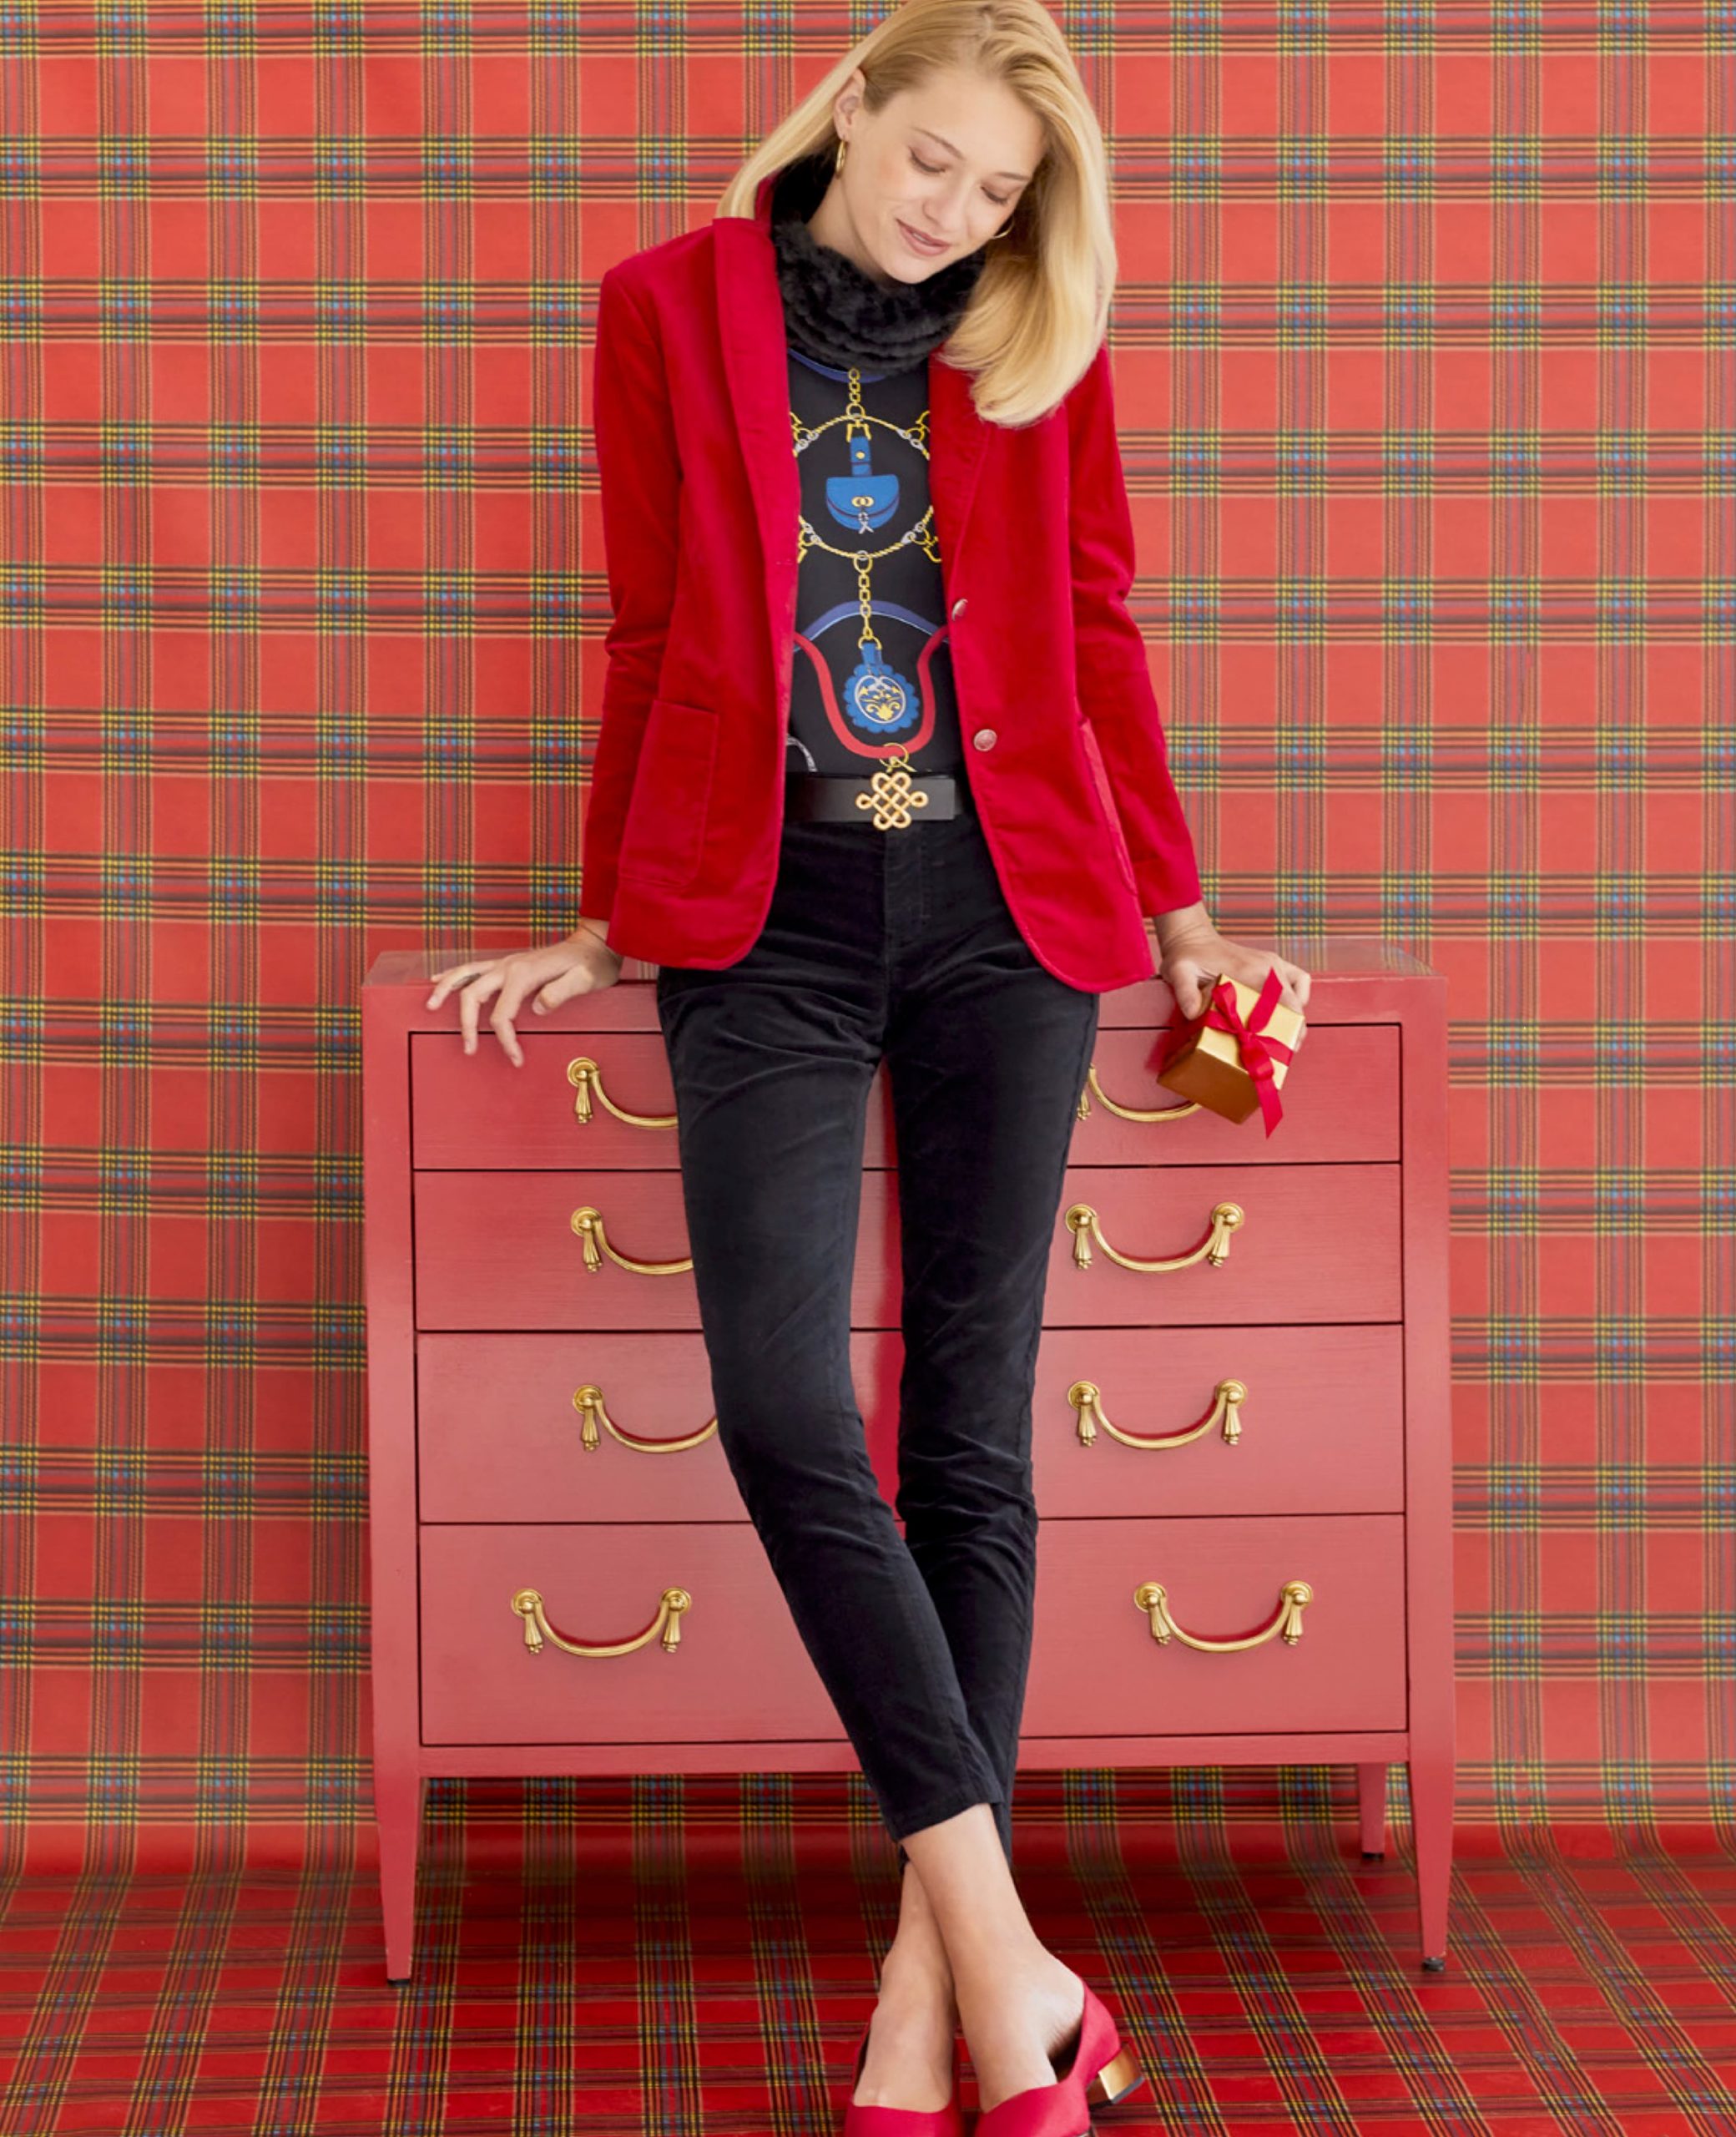 Female model leaning against red dresser in front of plaid wallpapered wall